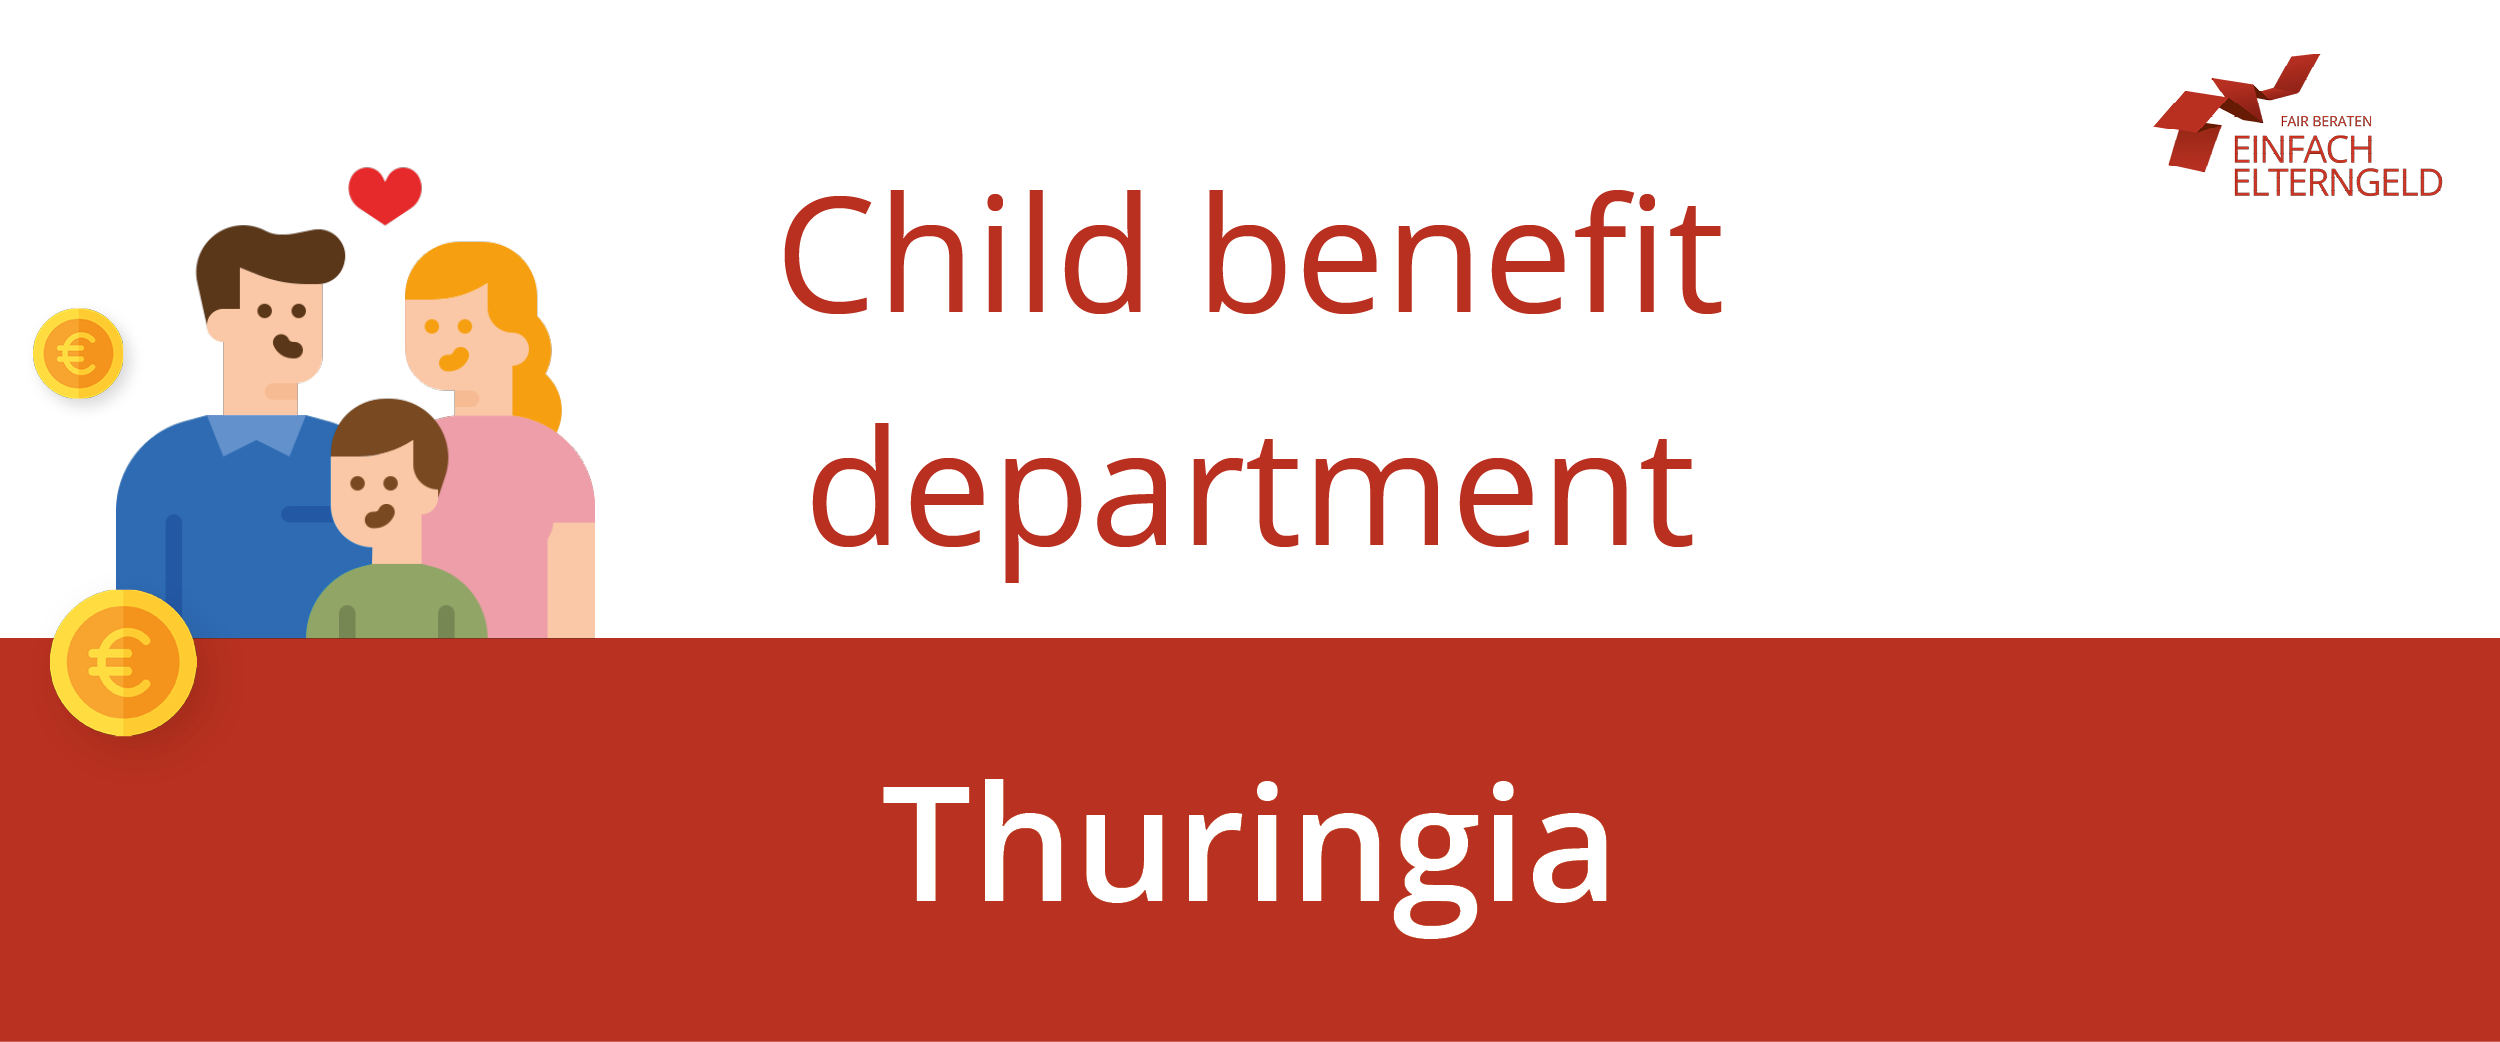 We introduce you to the child benefit department of Thuringia.